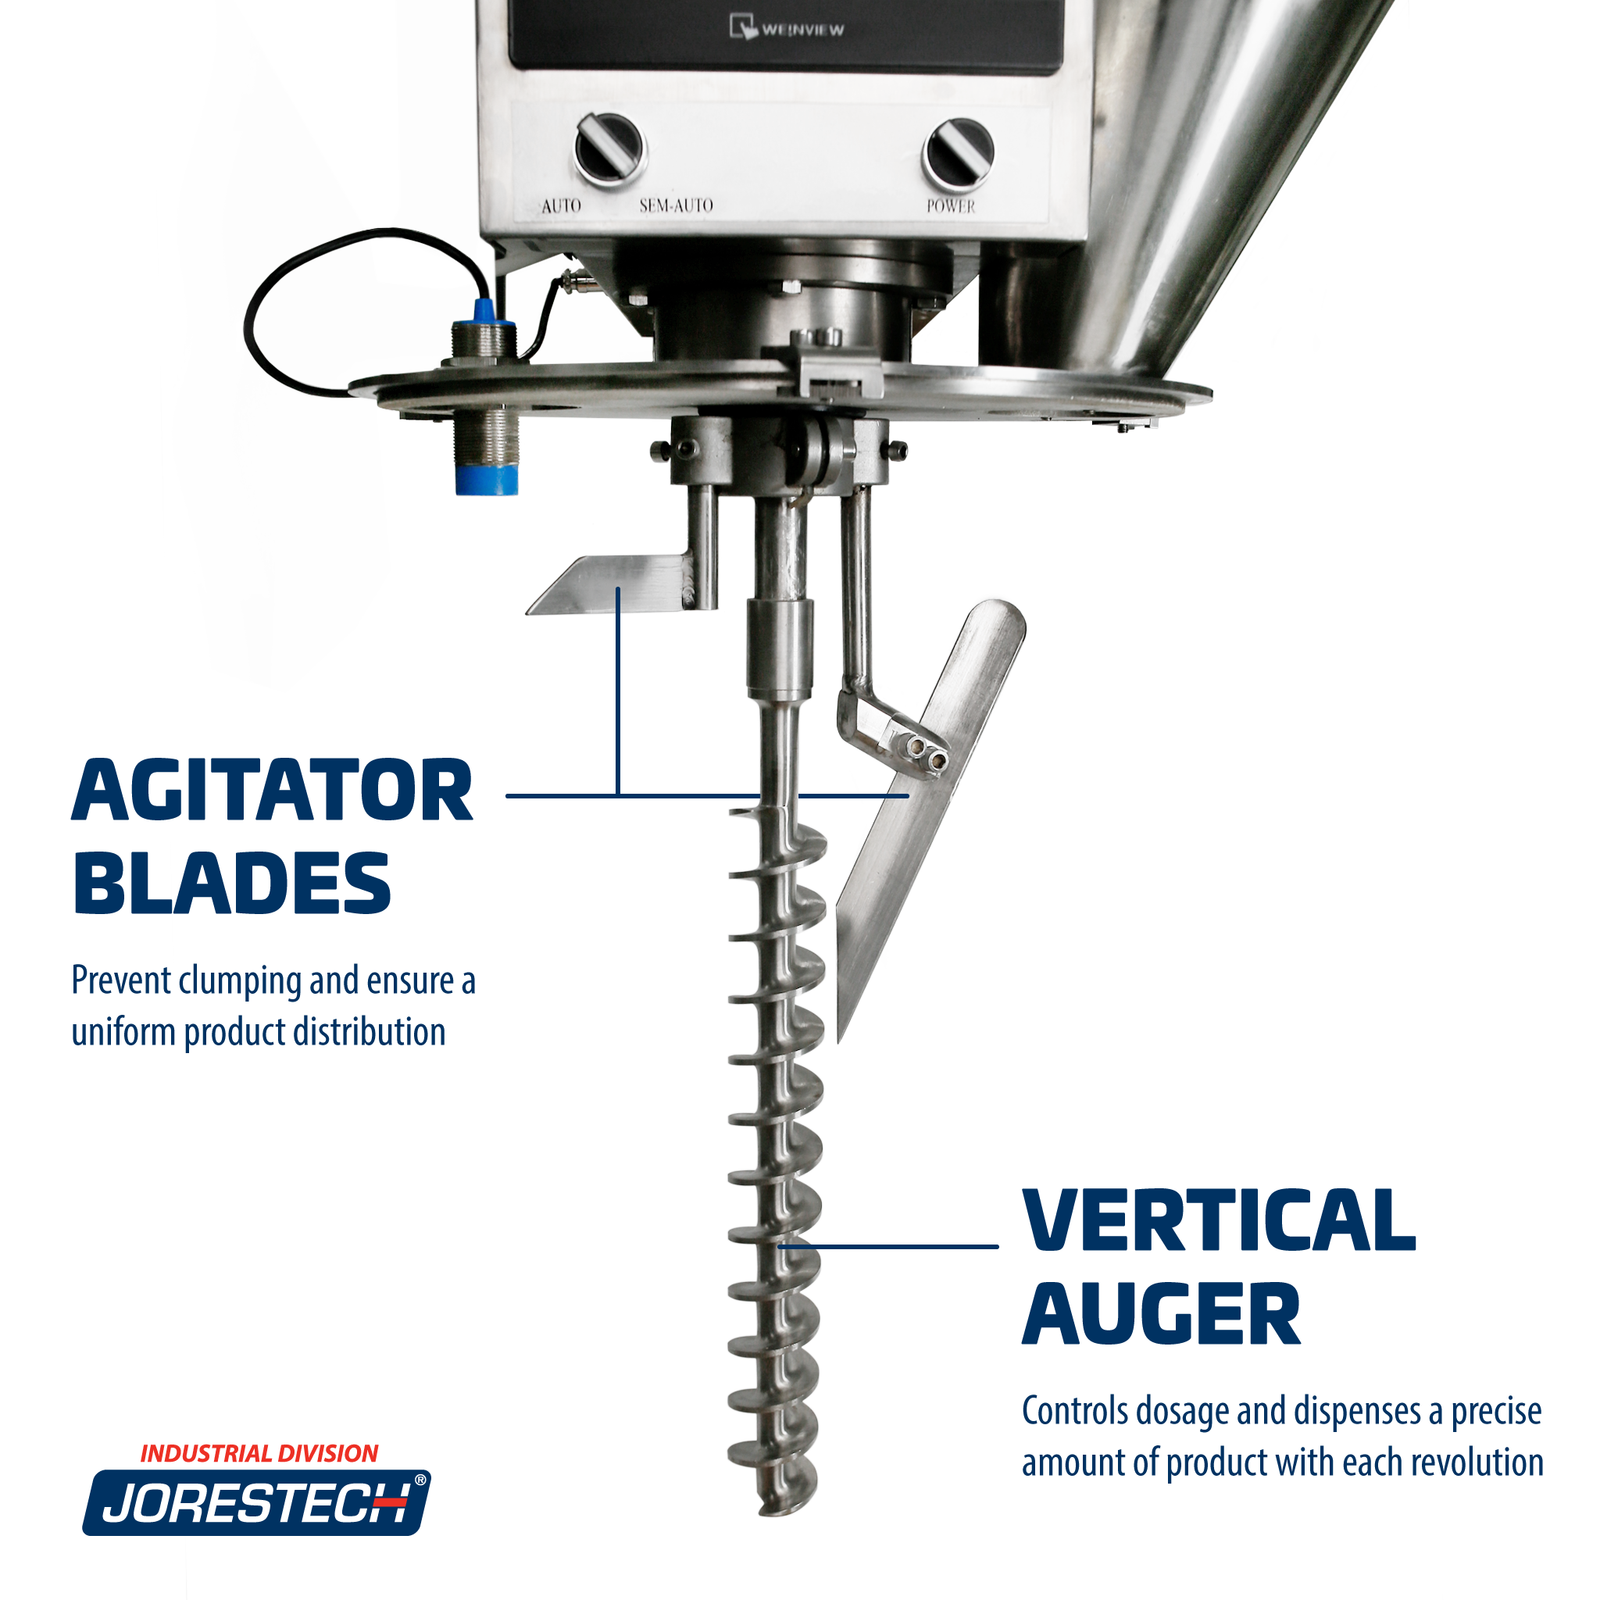 Close up of the semi-automatic auger powder filler for 20 ml showing the Vertical Auger and the Agitator Blades. Text in left reads: Vertical auger controls dosage and dispenses a precise amount of product each revolution. Text on the right reads: Agitator blades prevent clumping and ensure a uniform product distribution.